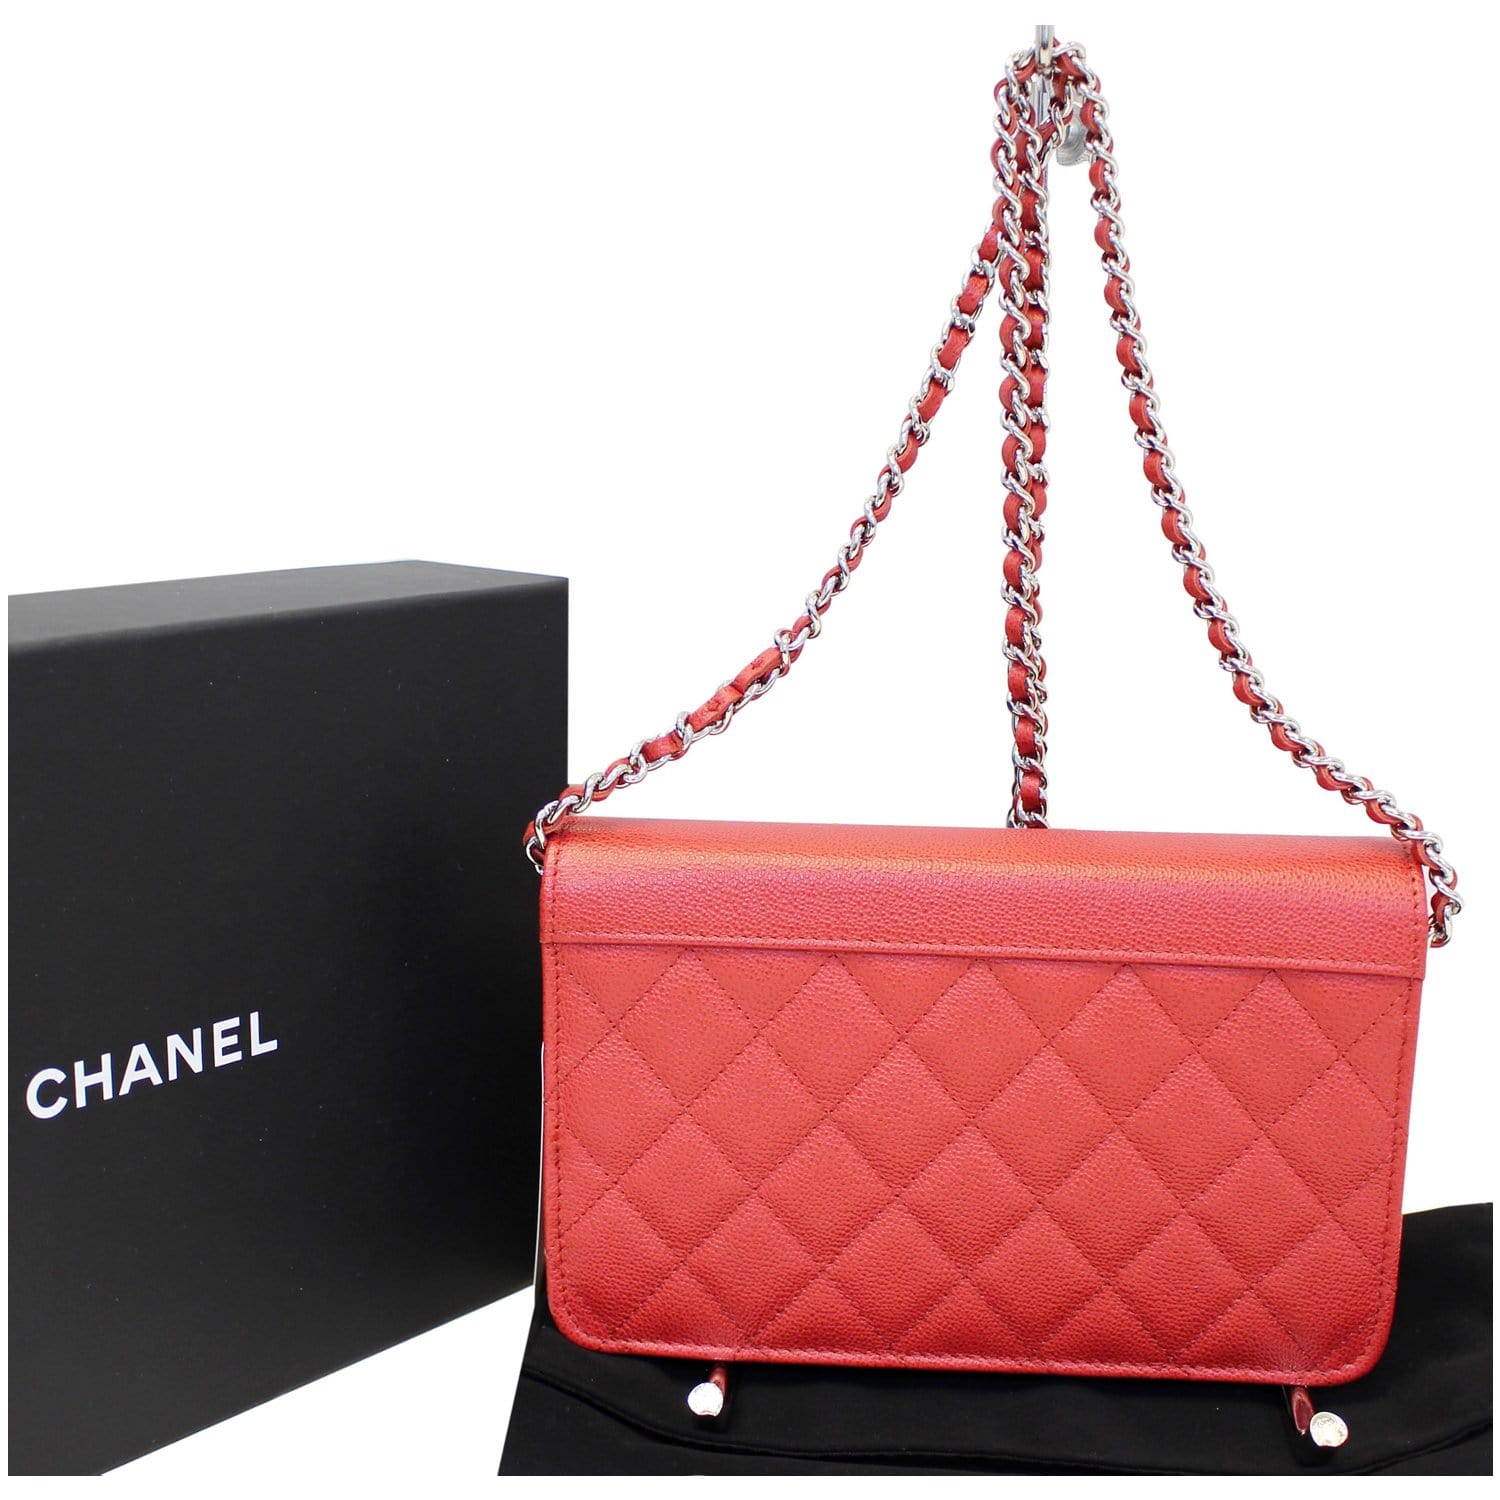 CHANEL Wallet on Chain Grained Calfskin Leather Shoulder Crossbody